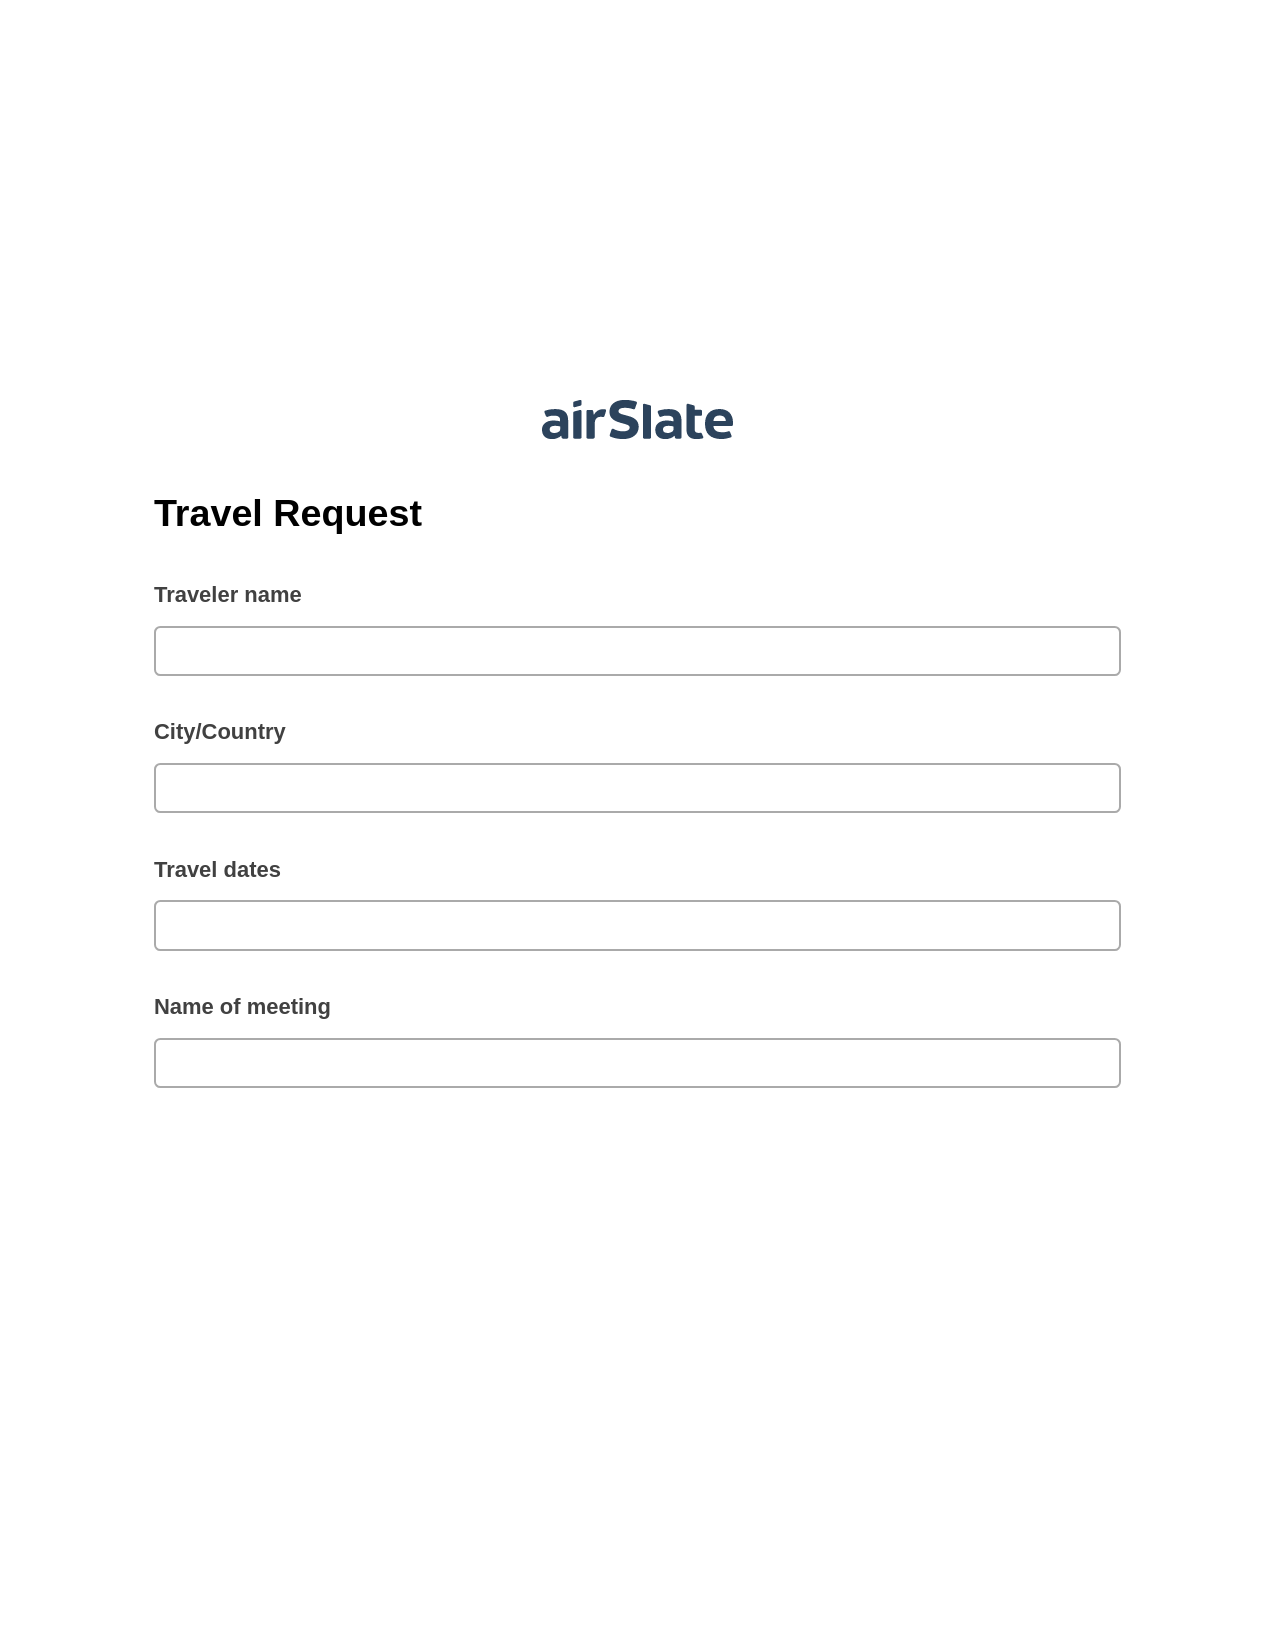 Travel Request Pre-fill Dropdowns from CSV File Bot, Send Mailchimp Campaign Bot, Archive to SharePoint Folder Bot